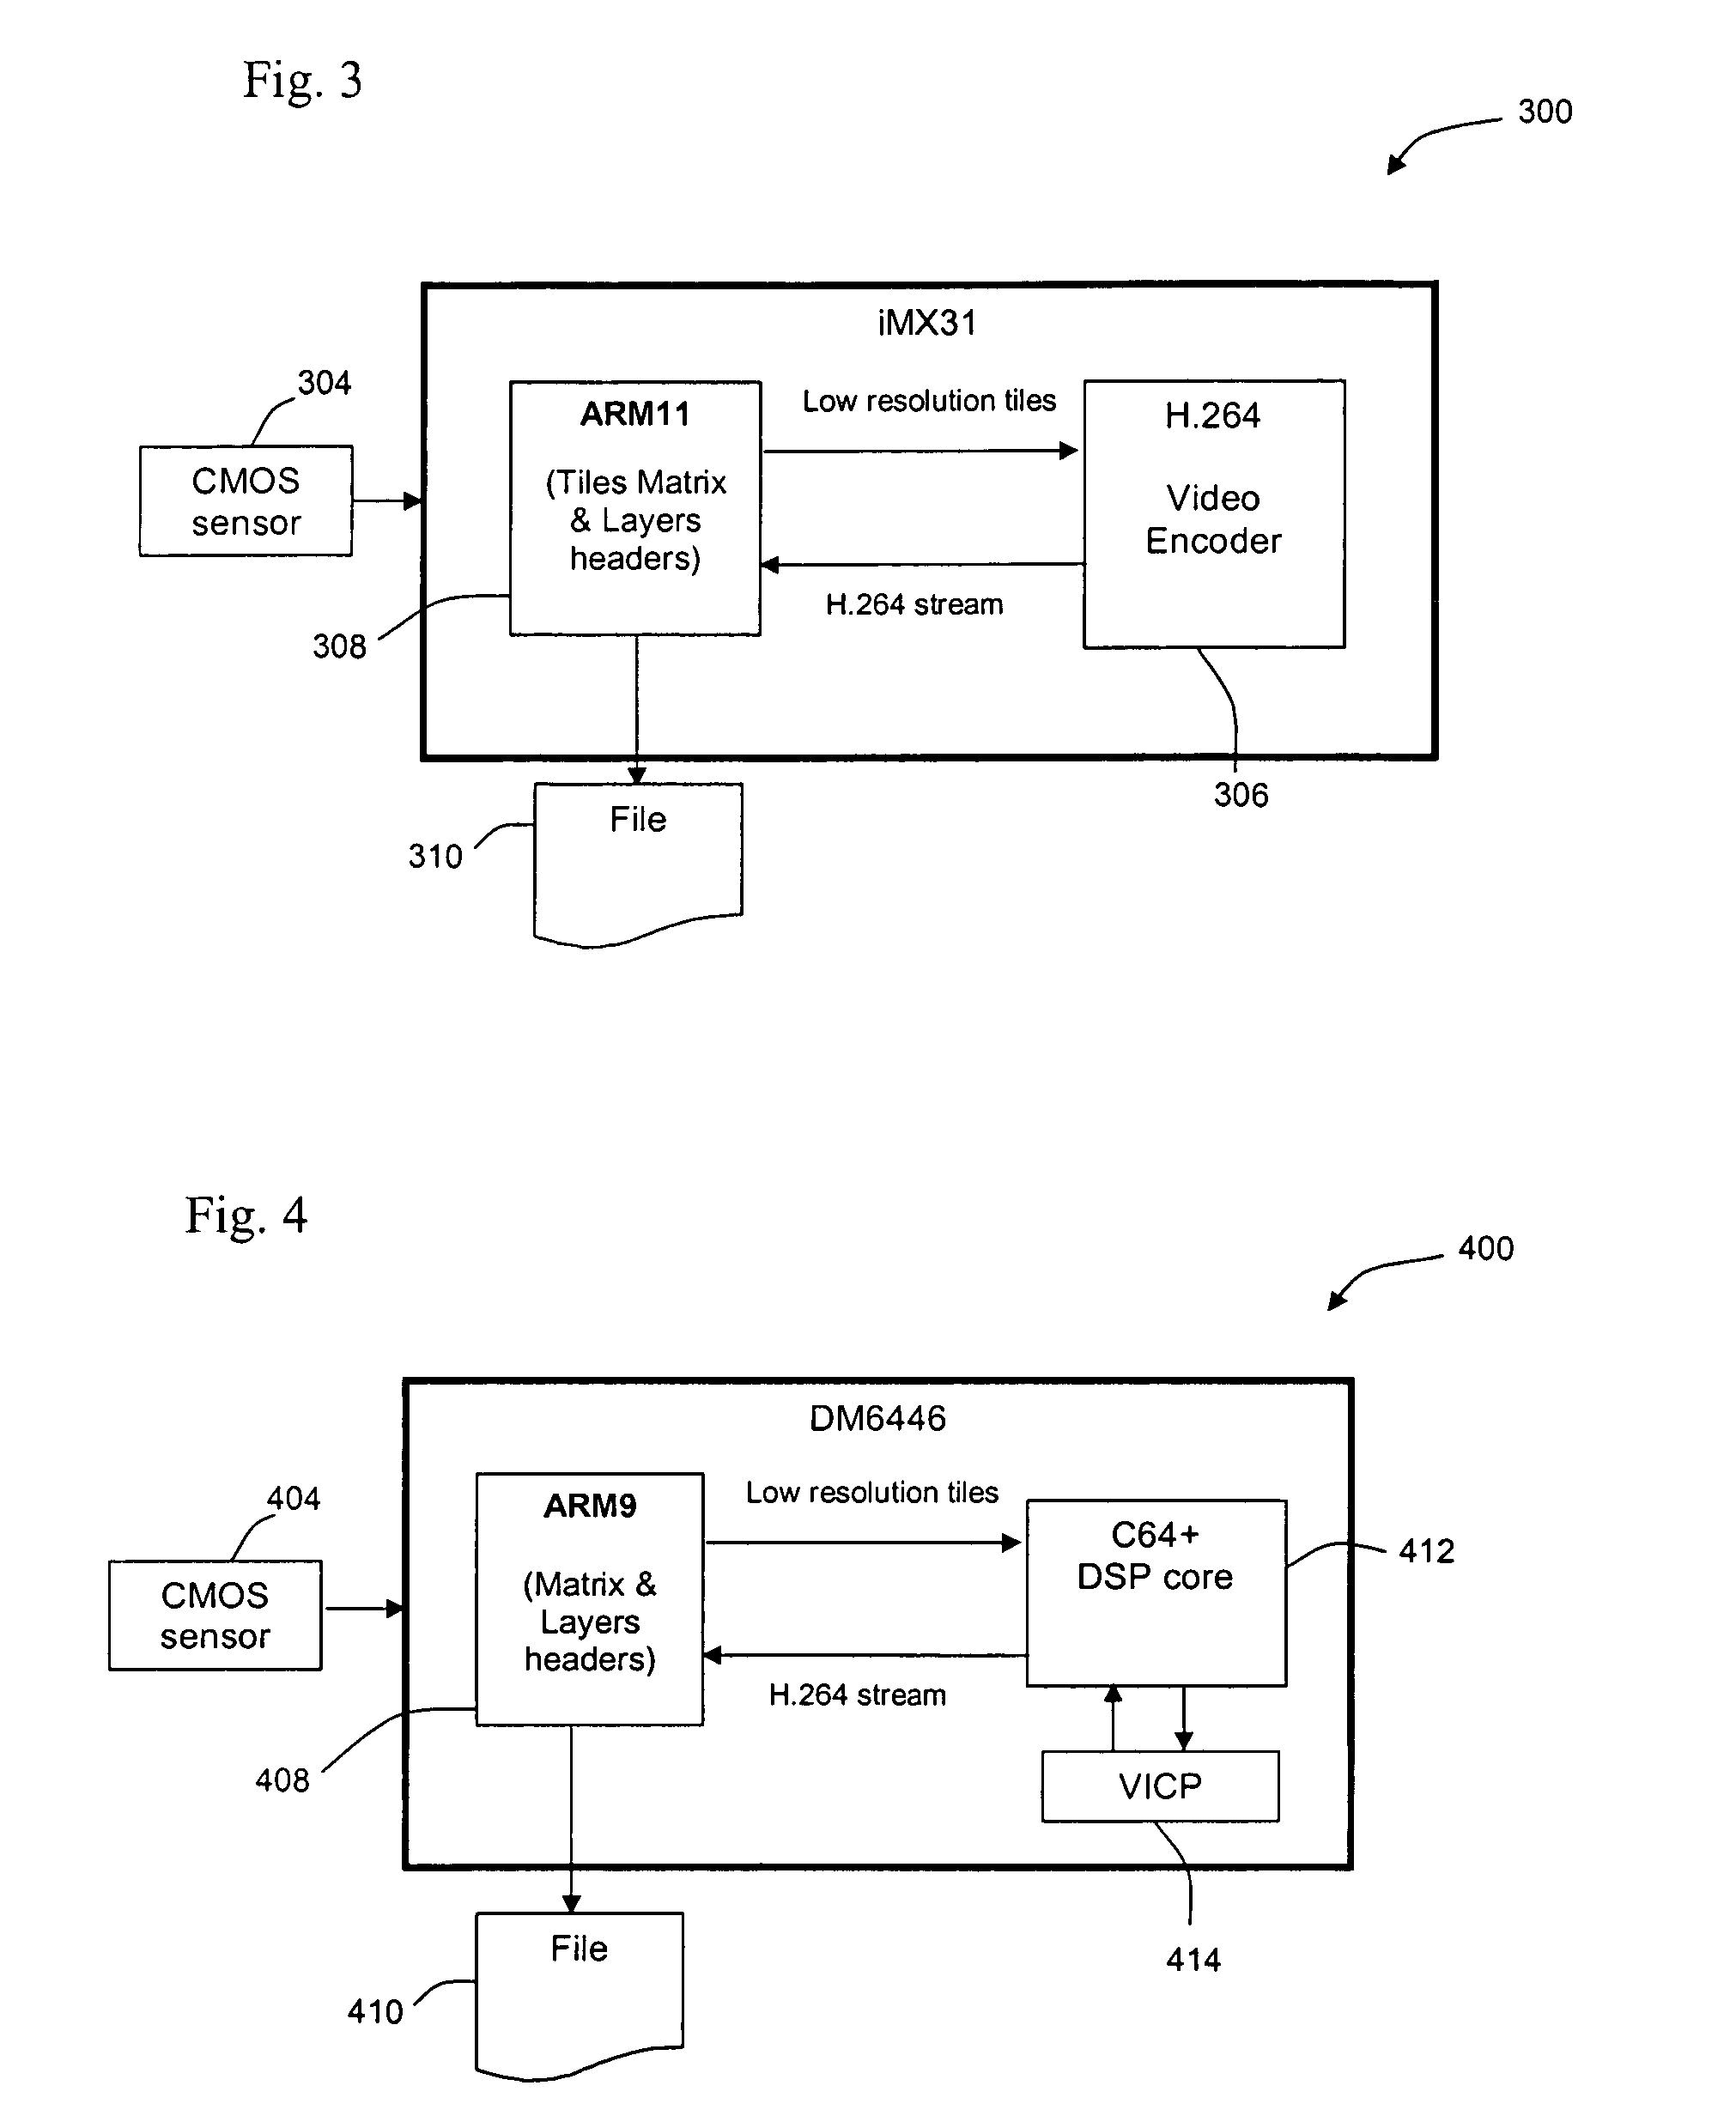 Architecture for image compression in a video hardware